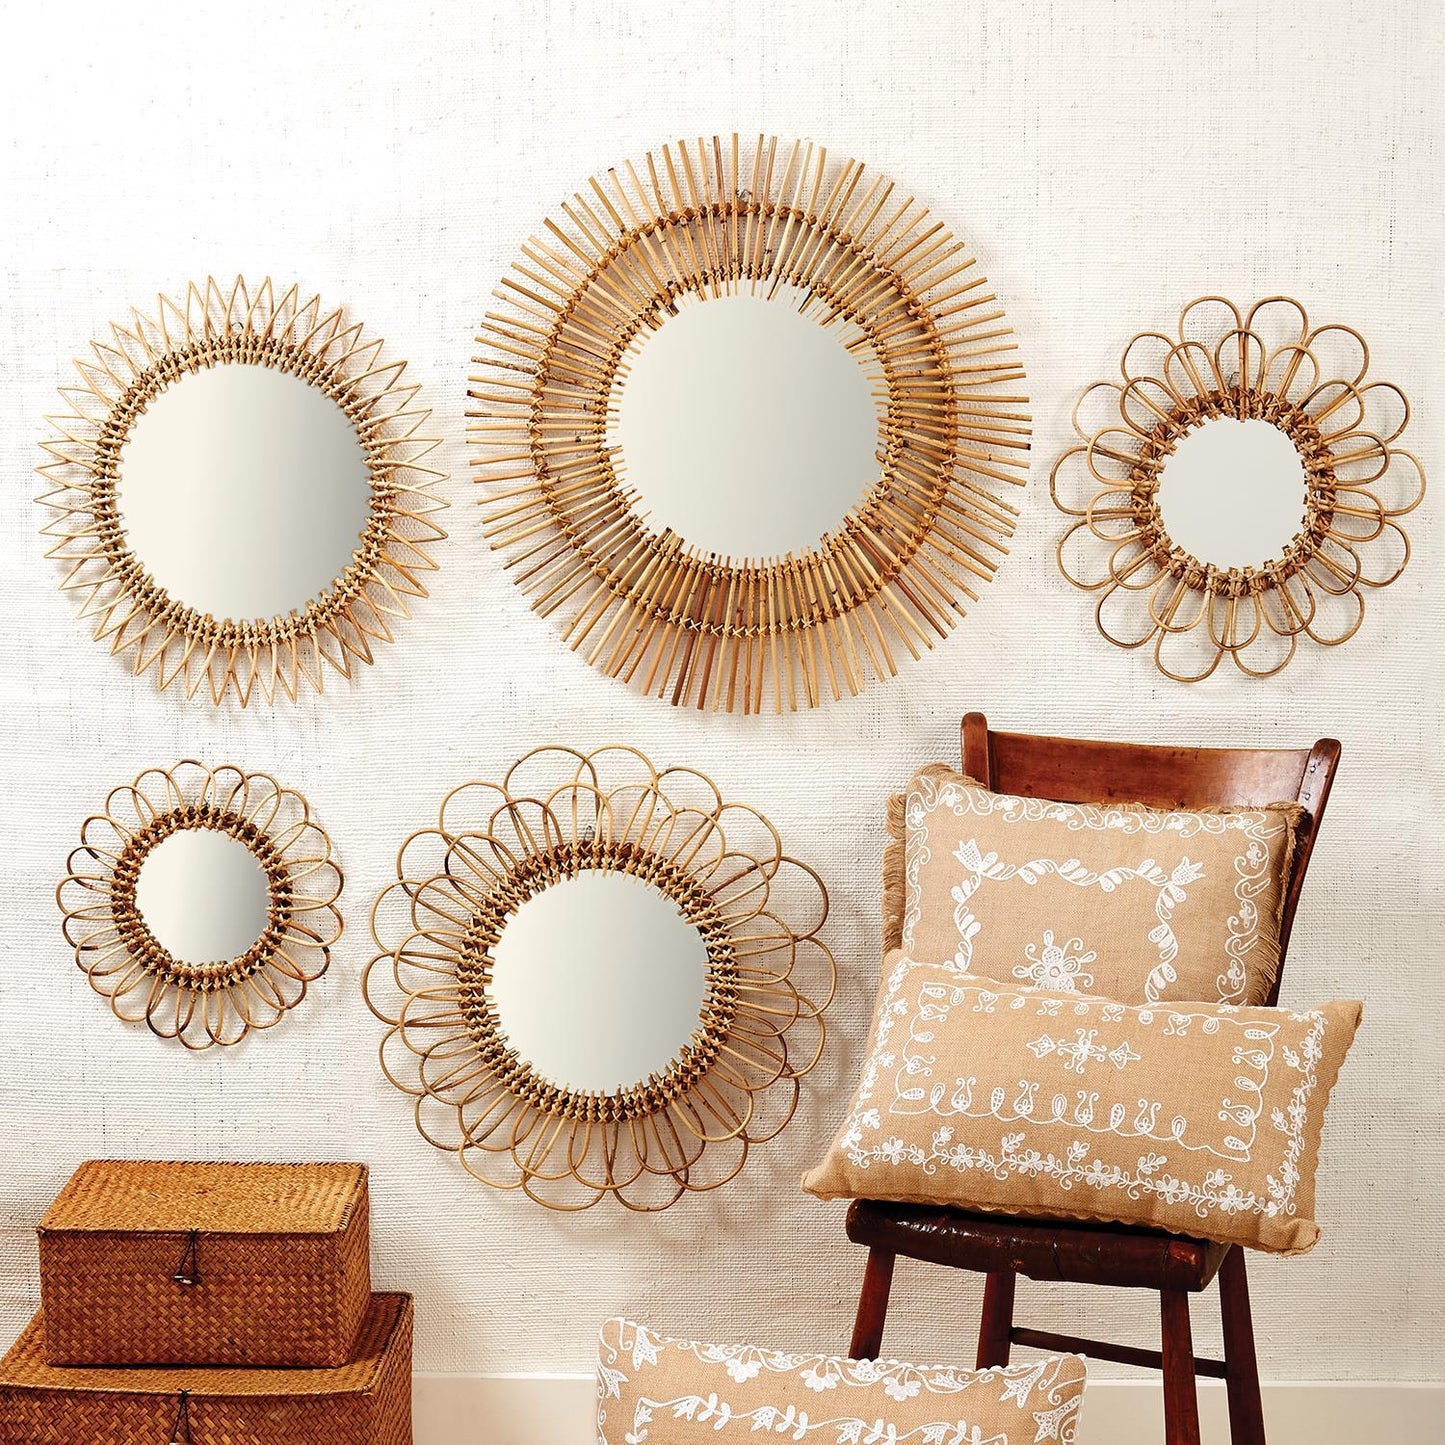 Hand-Crafted Natural Rattan Wall Mirrors - Rattan - Mellow Monkey